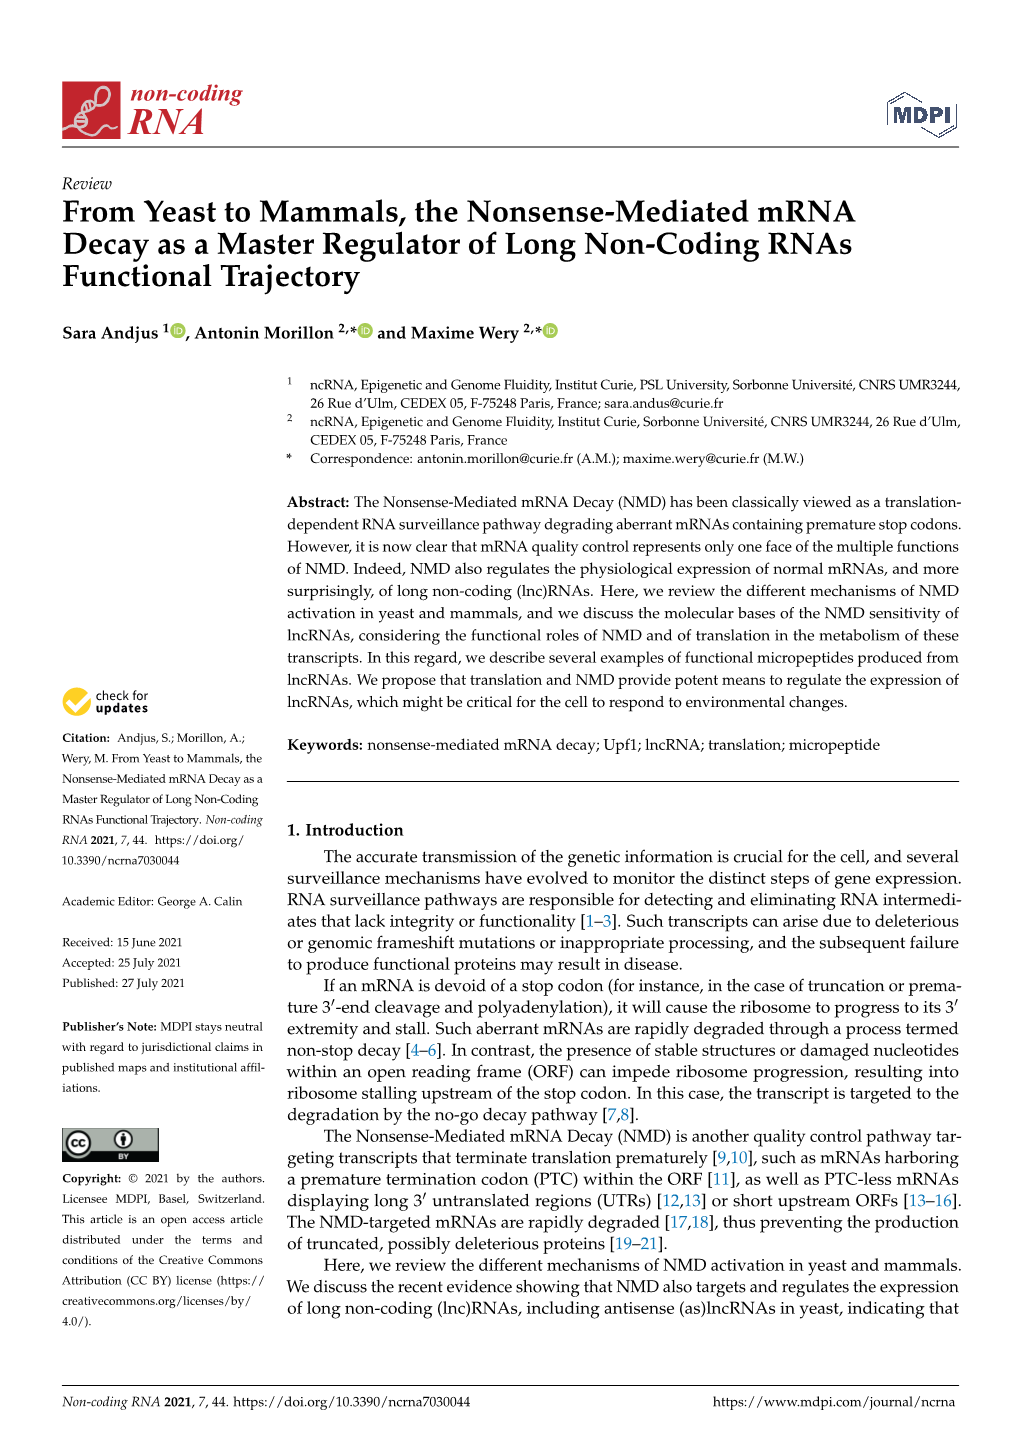 From Yeast to Mammals, the Nonsense-Mediated Mrna Decay As a Master Regulator of Long Non-Coding Rnas Functional Trajectory